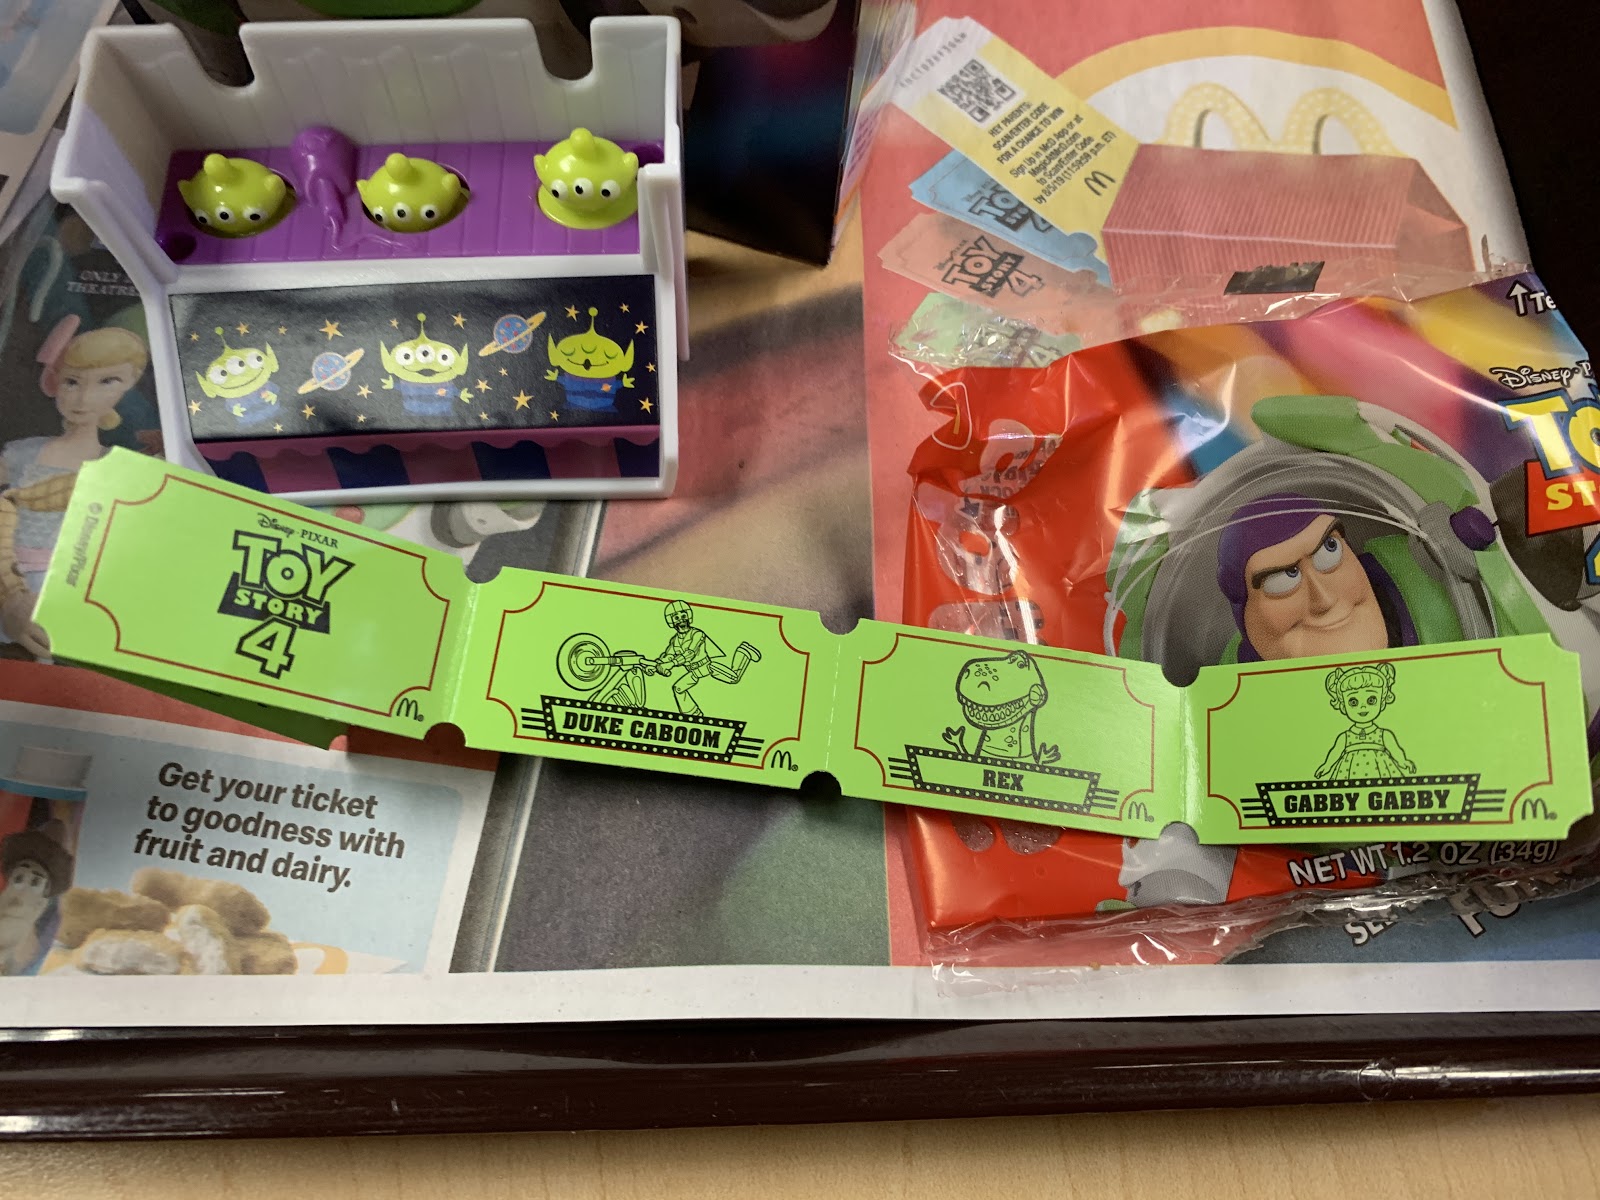 mcdonalds toy story 4 tickets